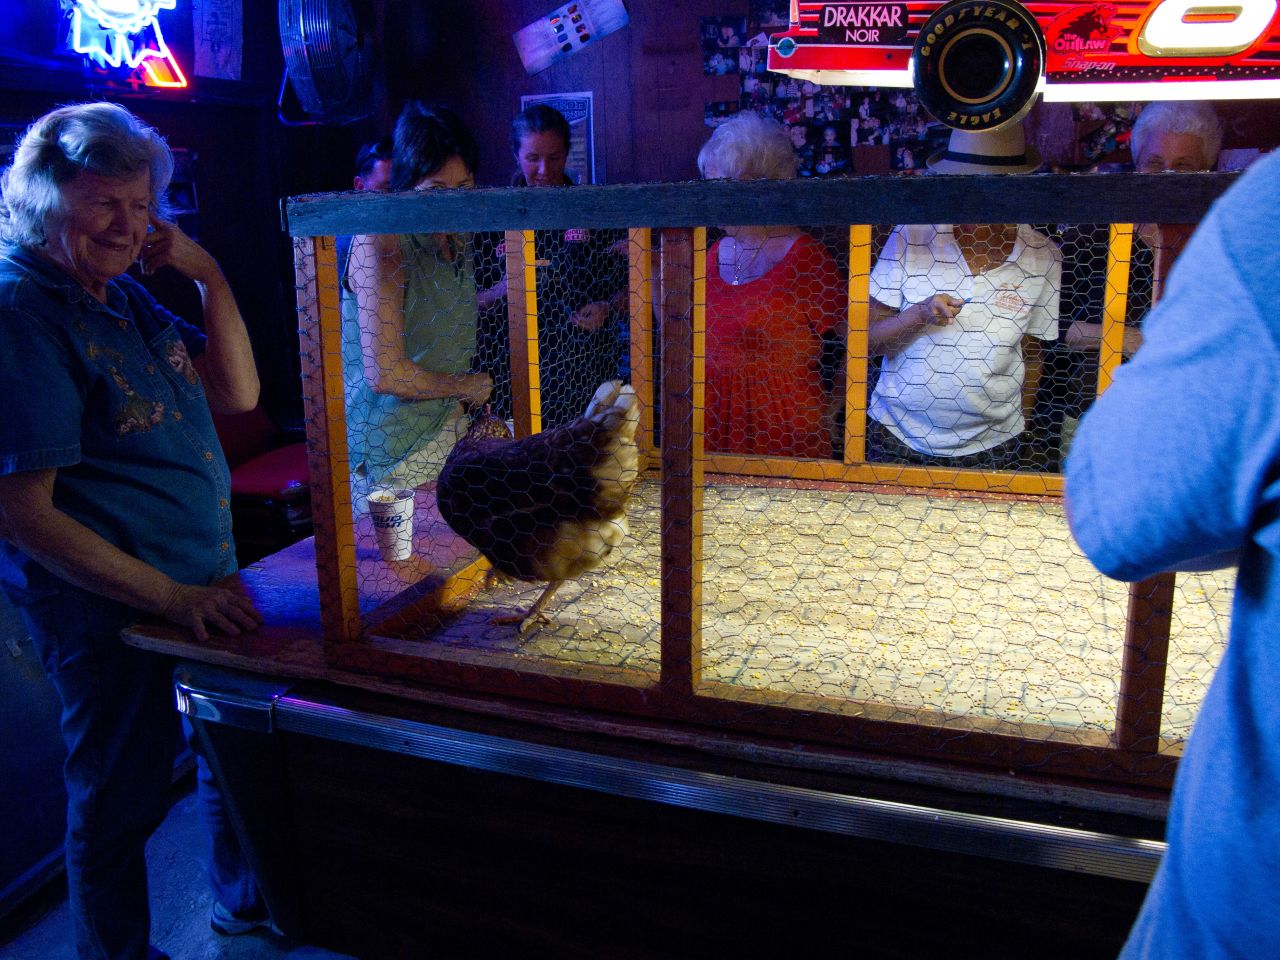 Chicken poop can make your day at this Austin bingo game.